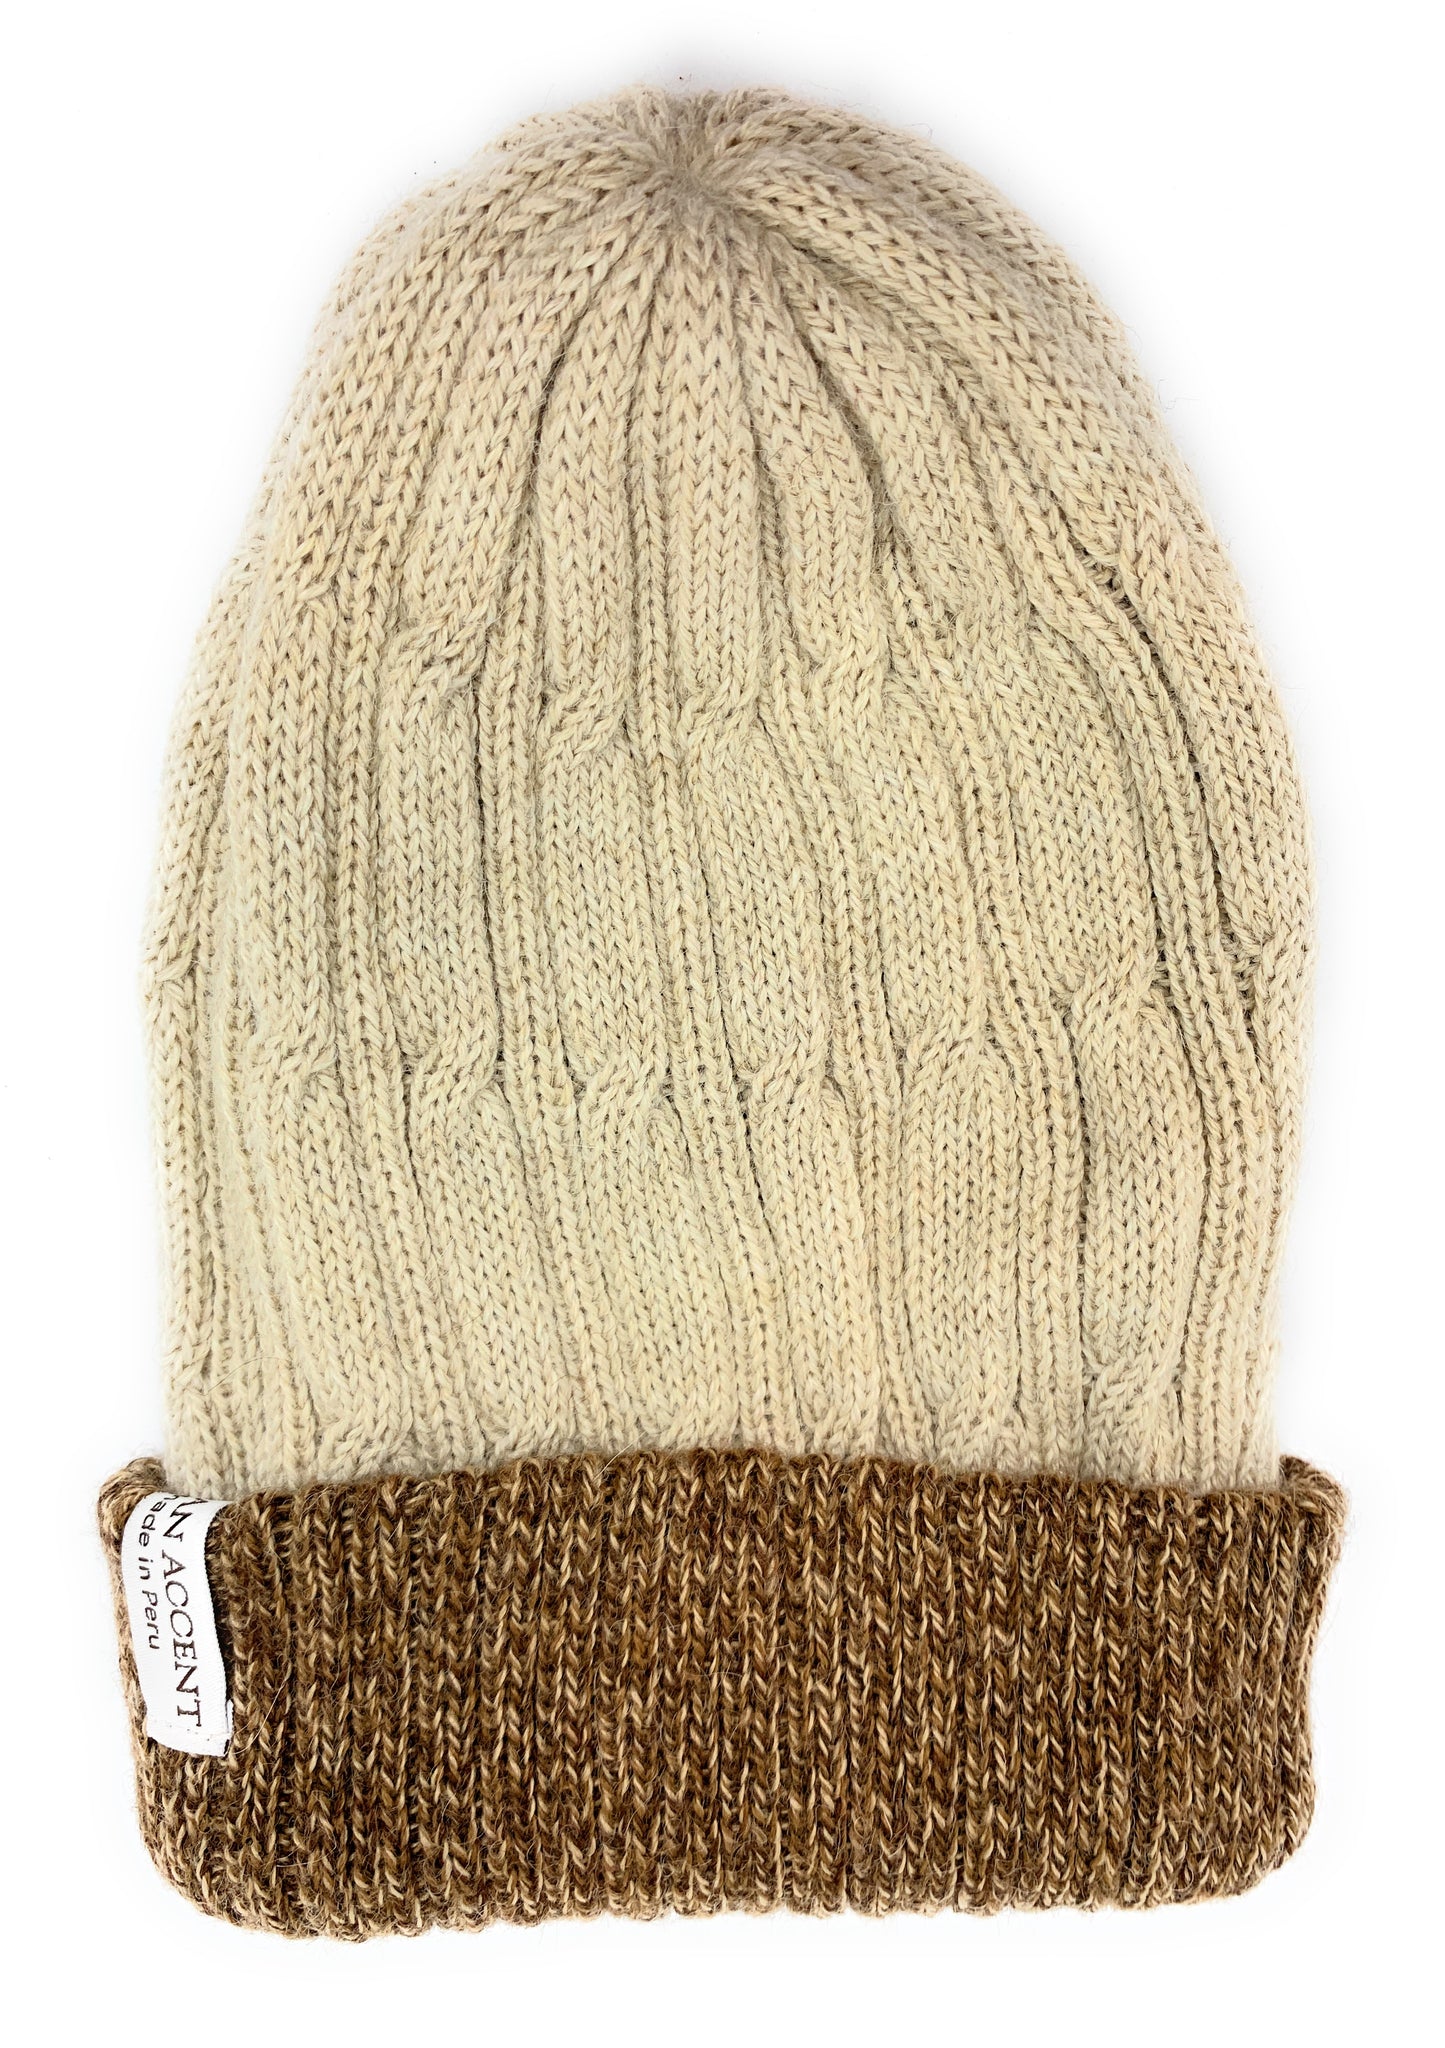 Reversible Alpaca Beanie. Beige with brown tweed and beige color. Made In Peru. - Peruvian Accent